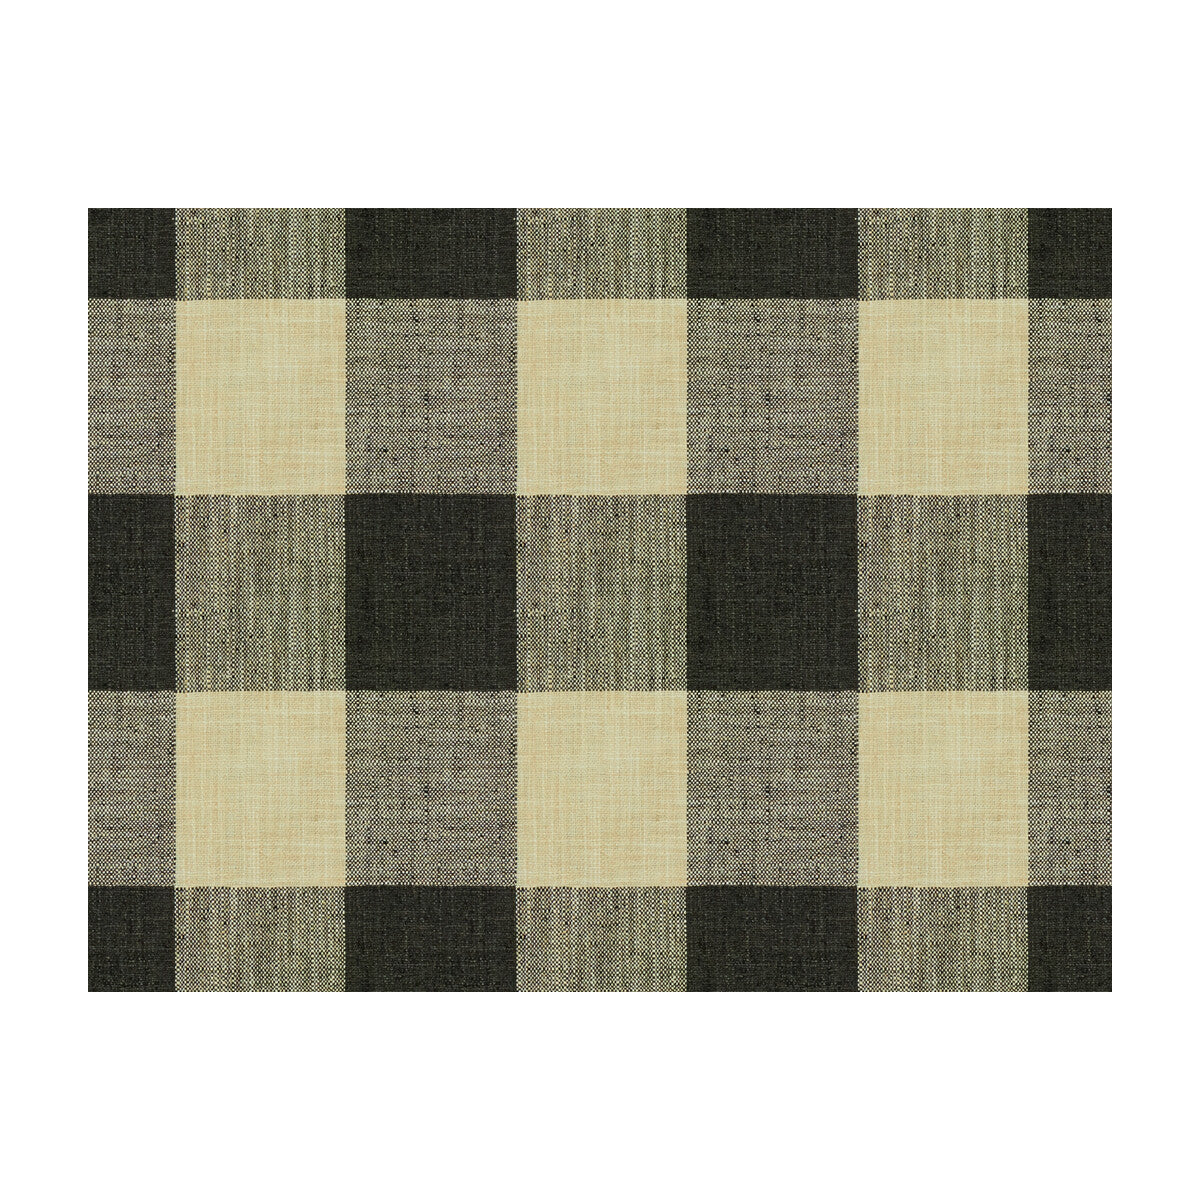 Kravet Basics fabric in 34090-81 color - pattern 34090.81.0 - by Kravet Basics in the Bungalow Chic II collection